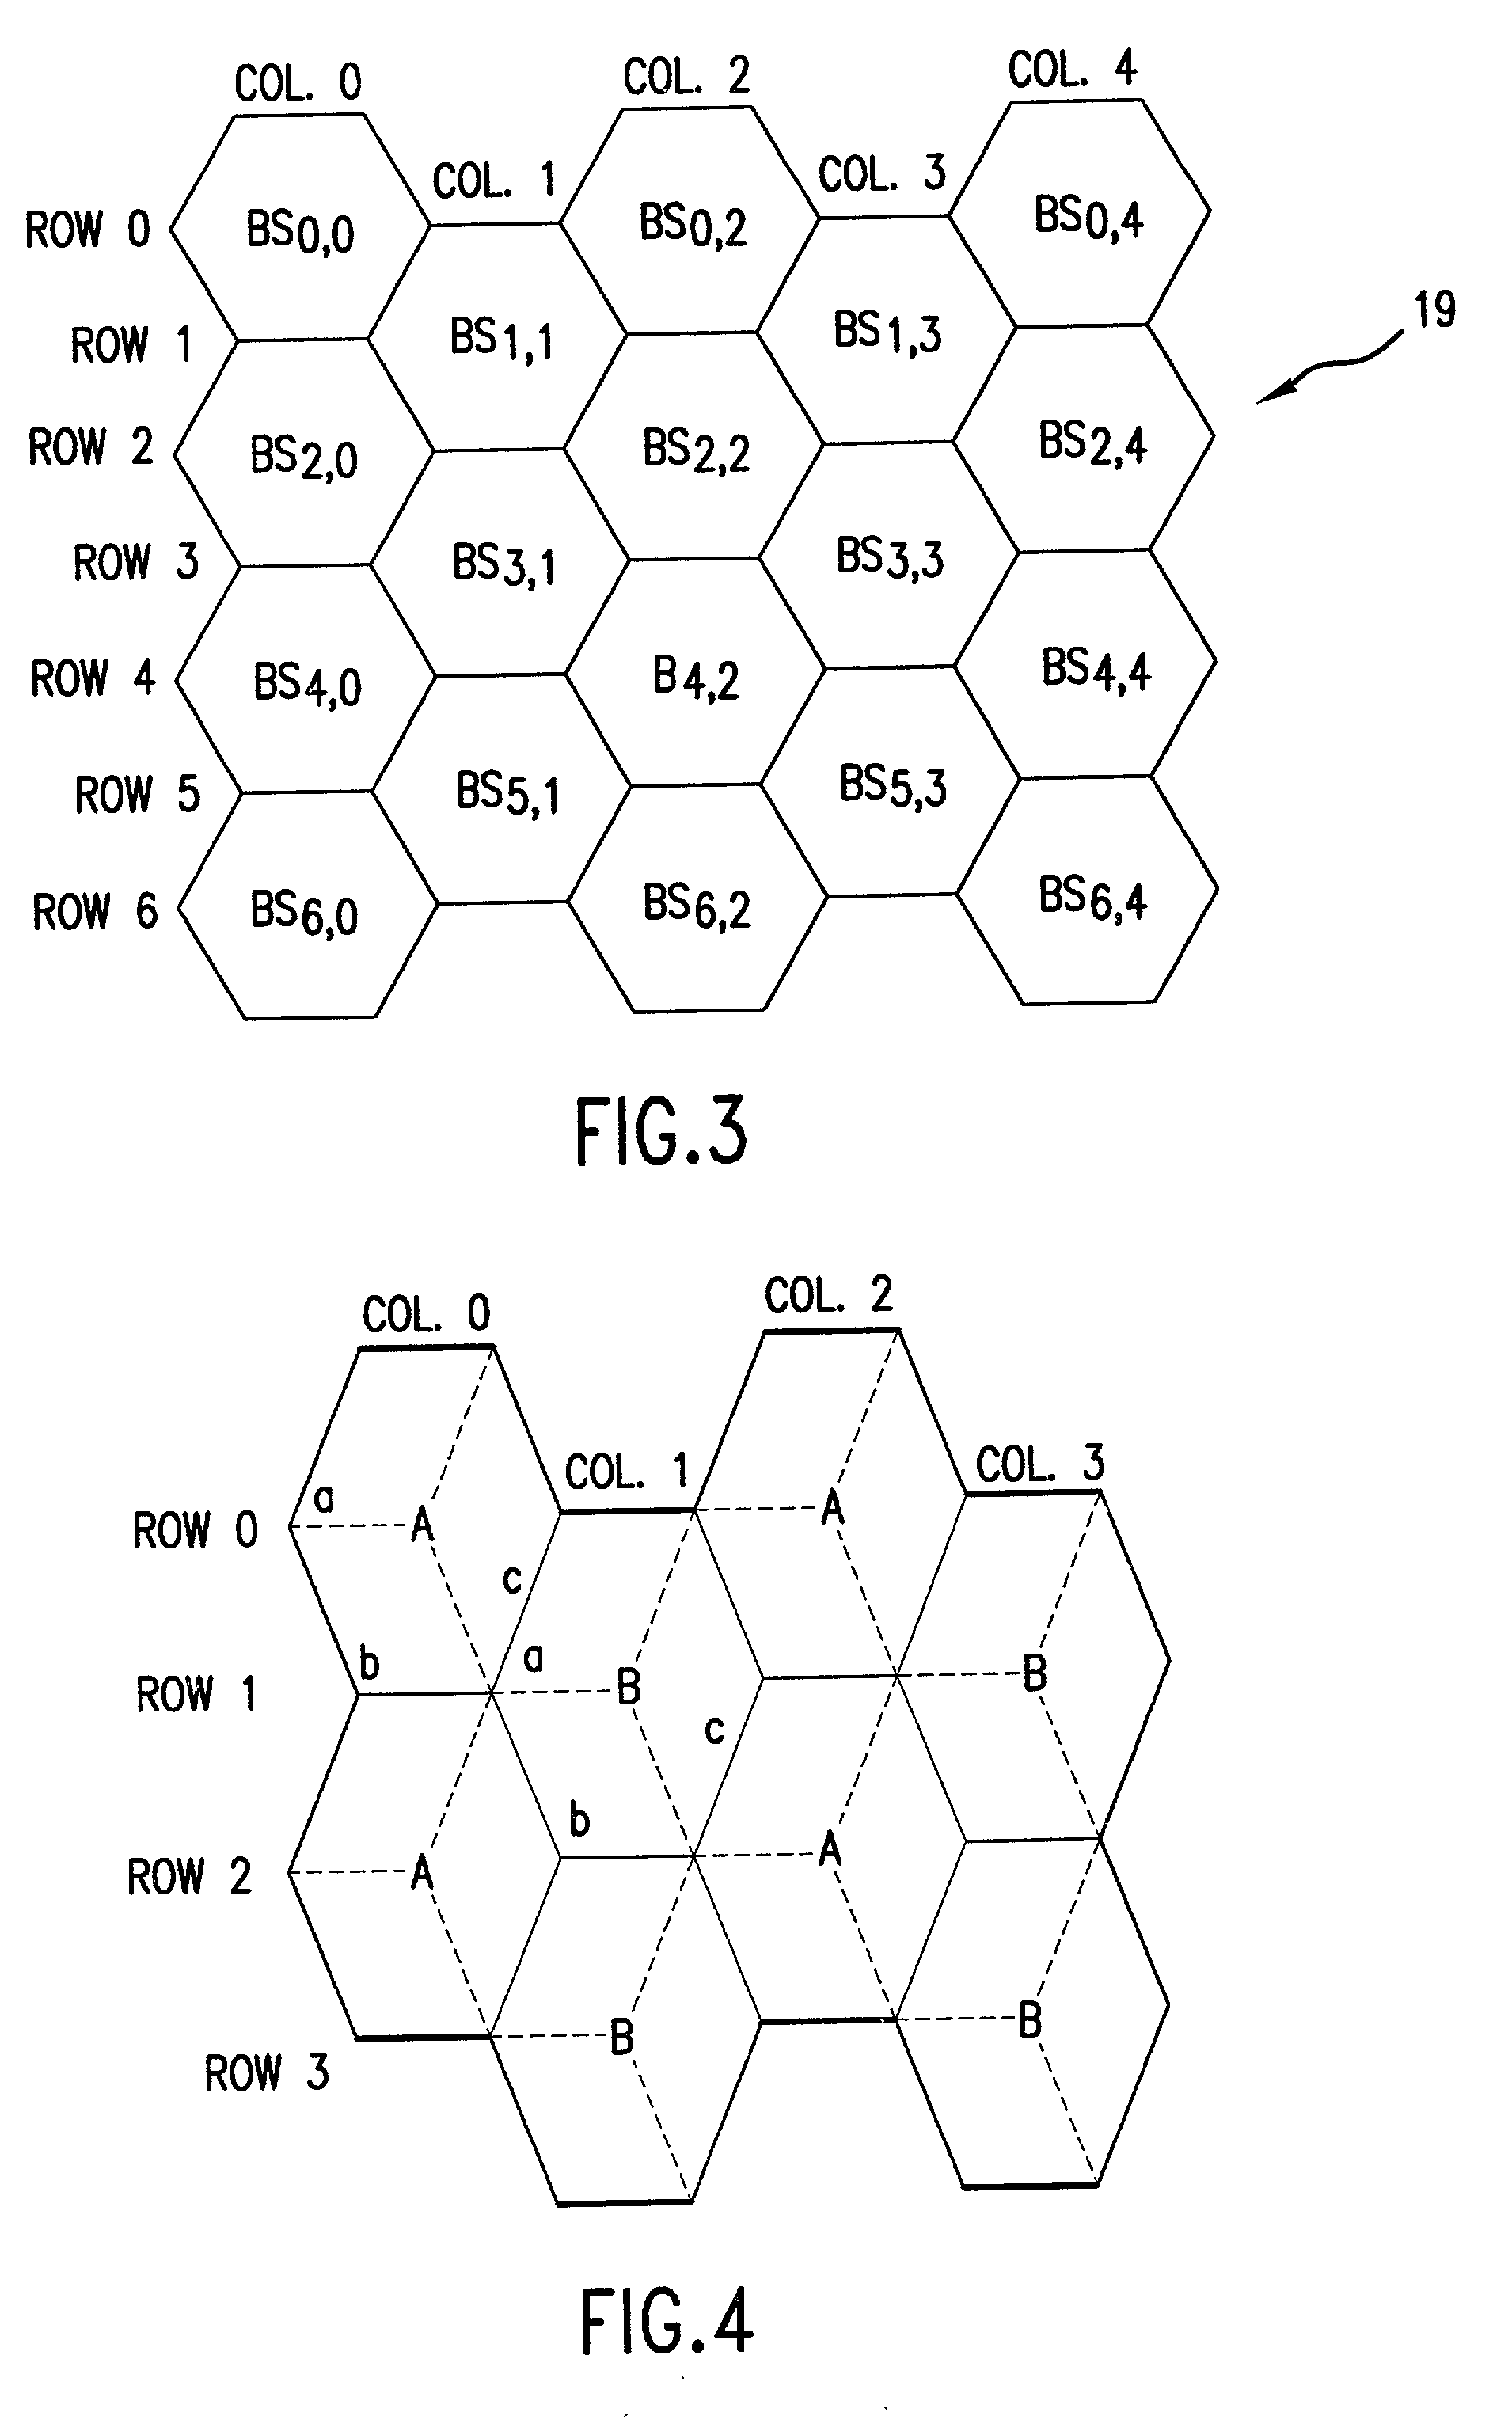 Process to allocate channels in a sectorized and tiered cellular network